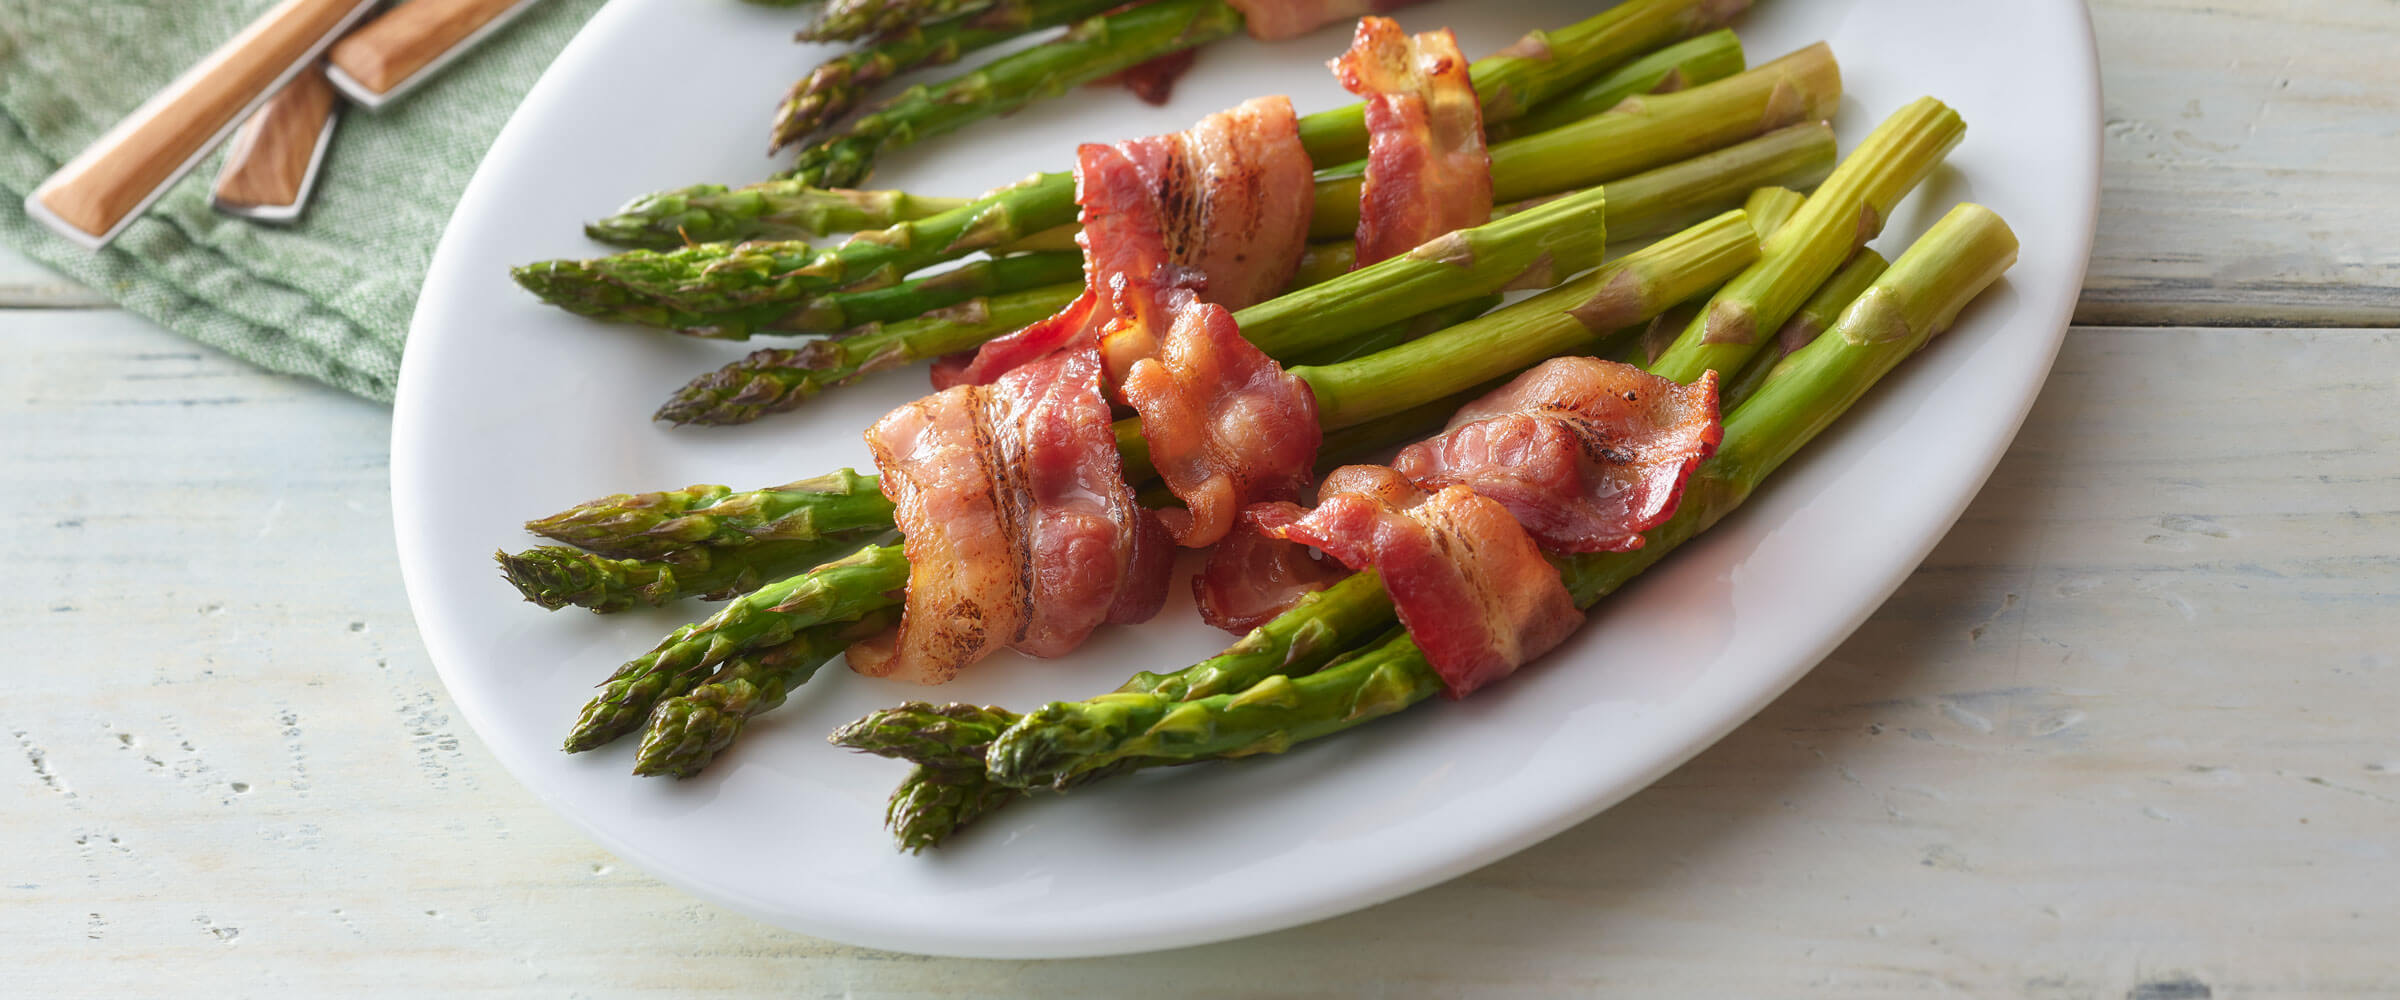 Bacon Wrapped Asparagus on white plate with green napkin